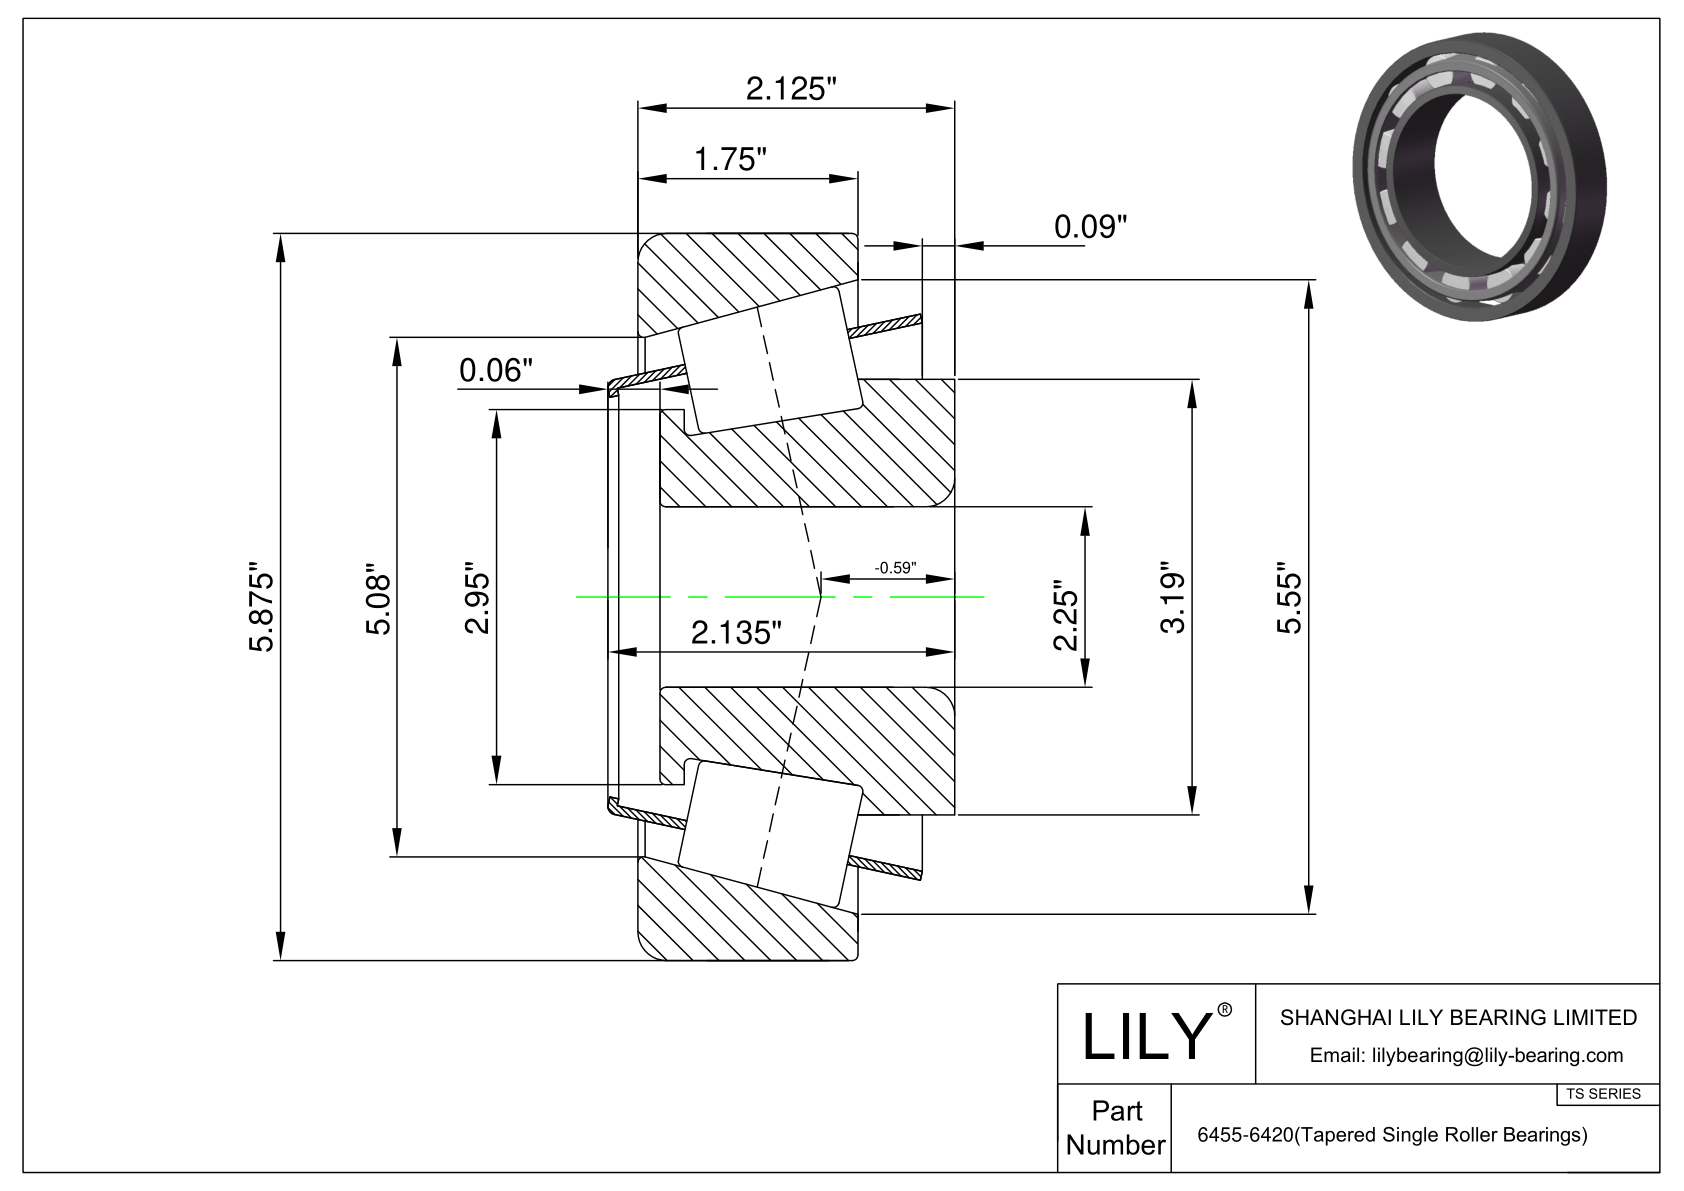 6455-6420 TS (Tapered Single Roller Bearings) (Imperial) cad drawing